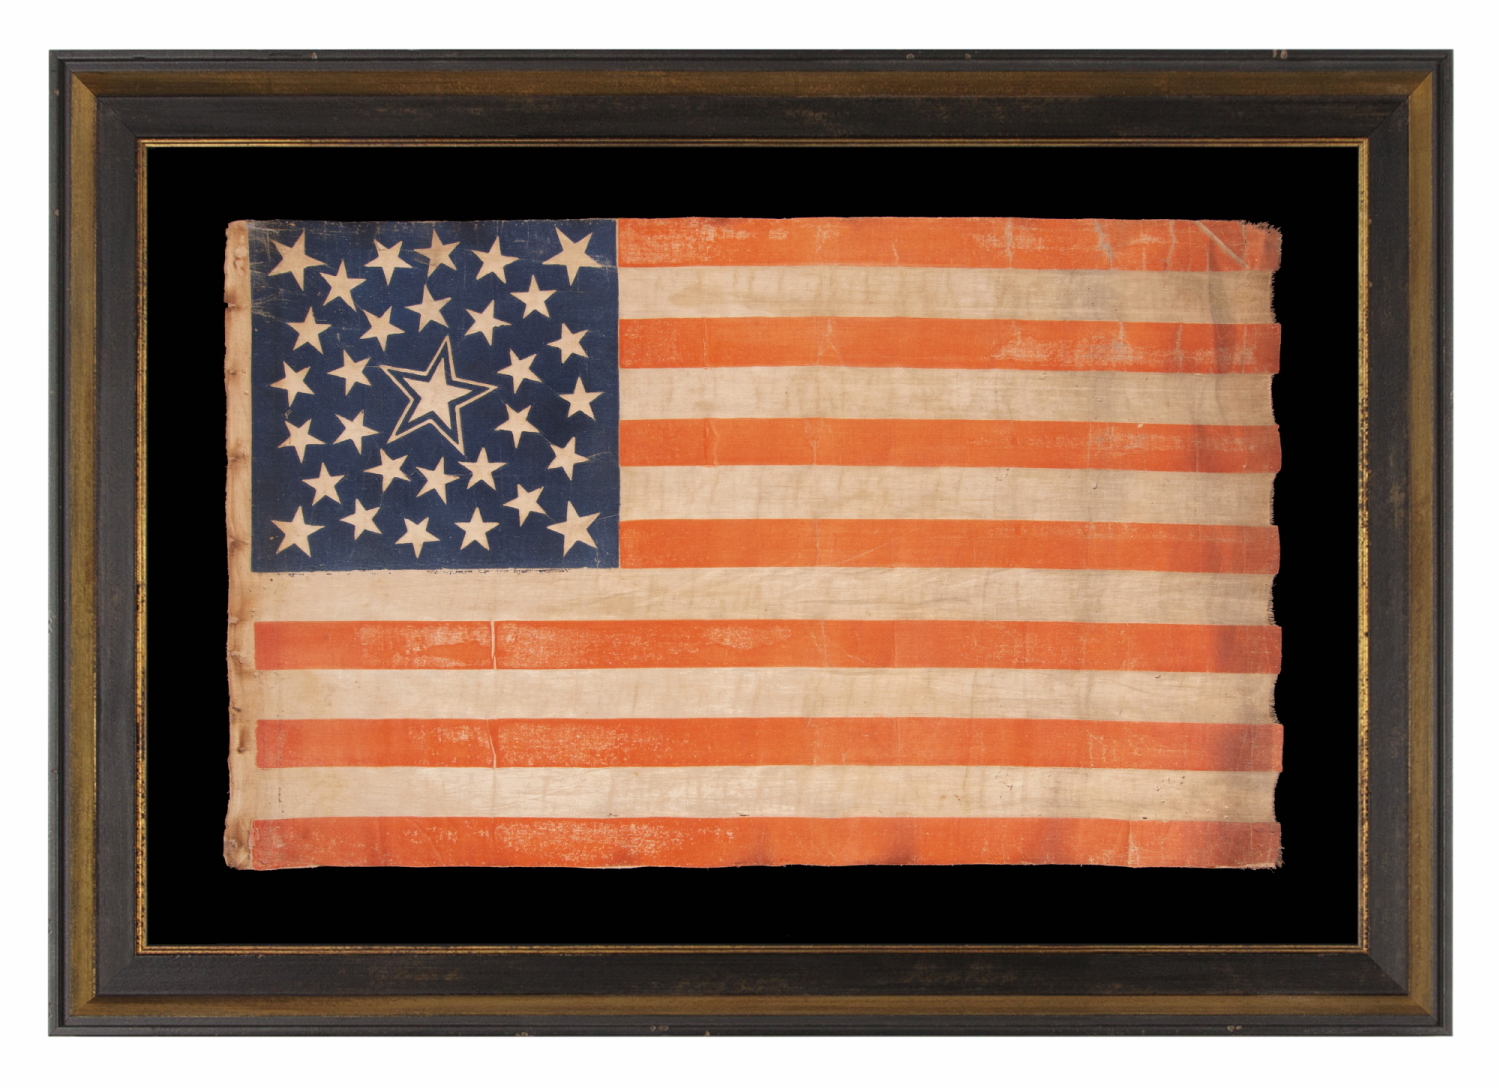 31 STARS ON AN ANTIQUE AMERICAN FLAG OF THE PRE-CIVIL WAR ERA, WITH A DOUBLE-WREATH STYLE MEDALLION CONFIGURATION THAT FEATURES A LARGE, HALOED CENTER STAR; REFLECTS THE PERIOD WHEN CALIFORNIA WAS THE MOST RECENT STATE TO JOIN THE UNION, 1850-1858